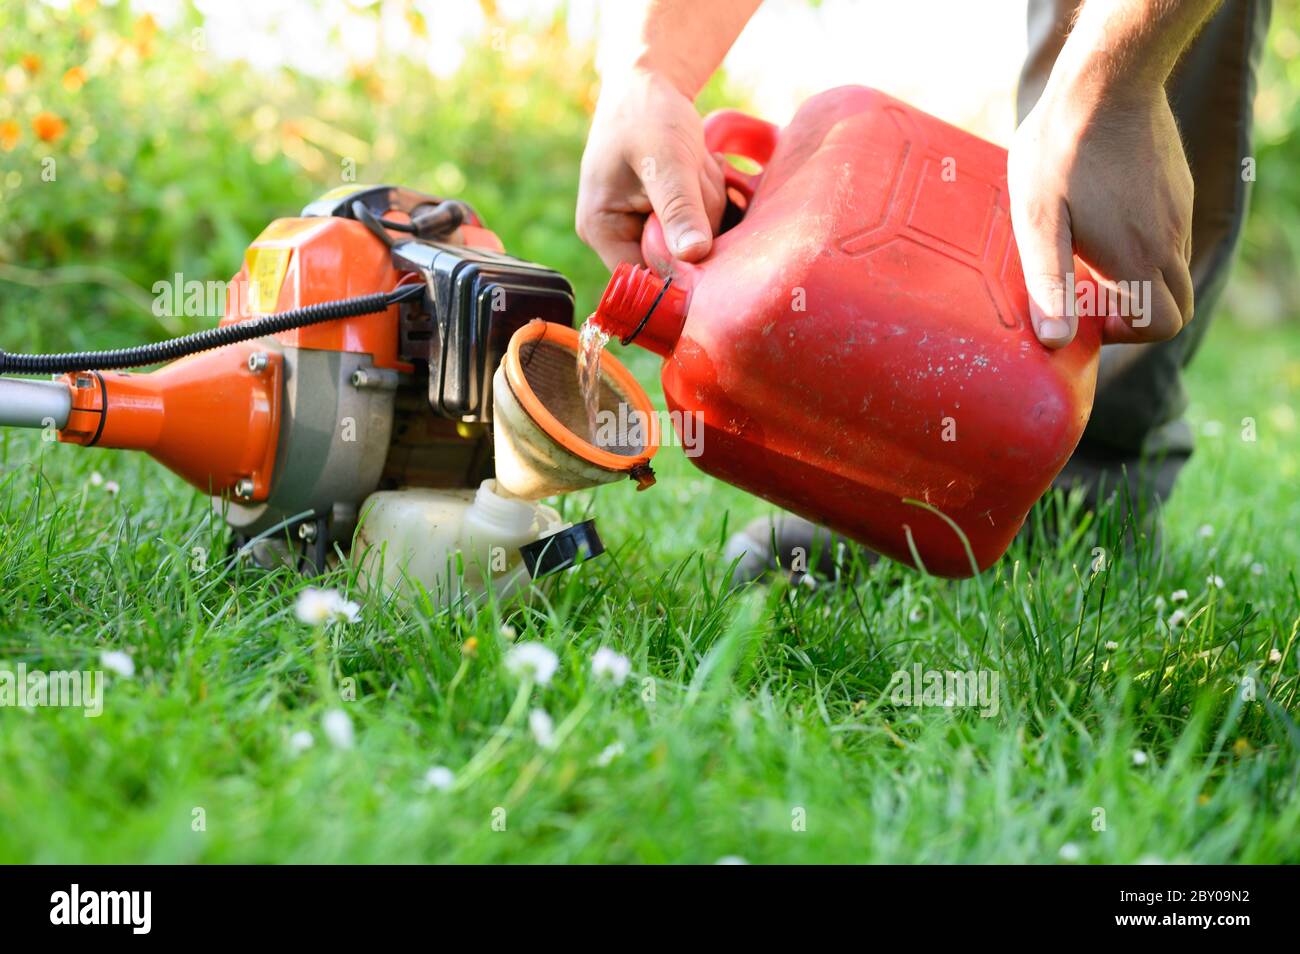 Gardener refueling brush cutter close up. Gardening tools maintenance. Lawn care with brush cutters .  Stock Photo